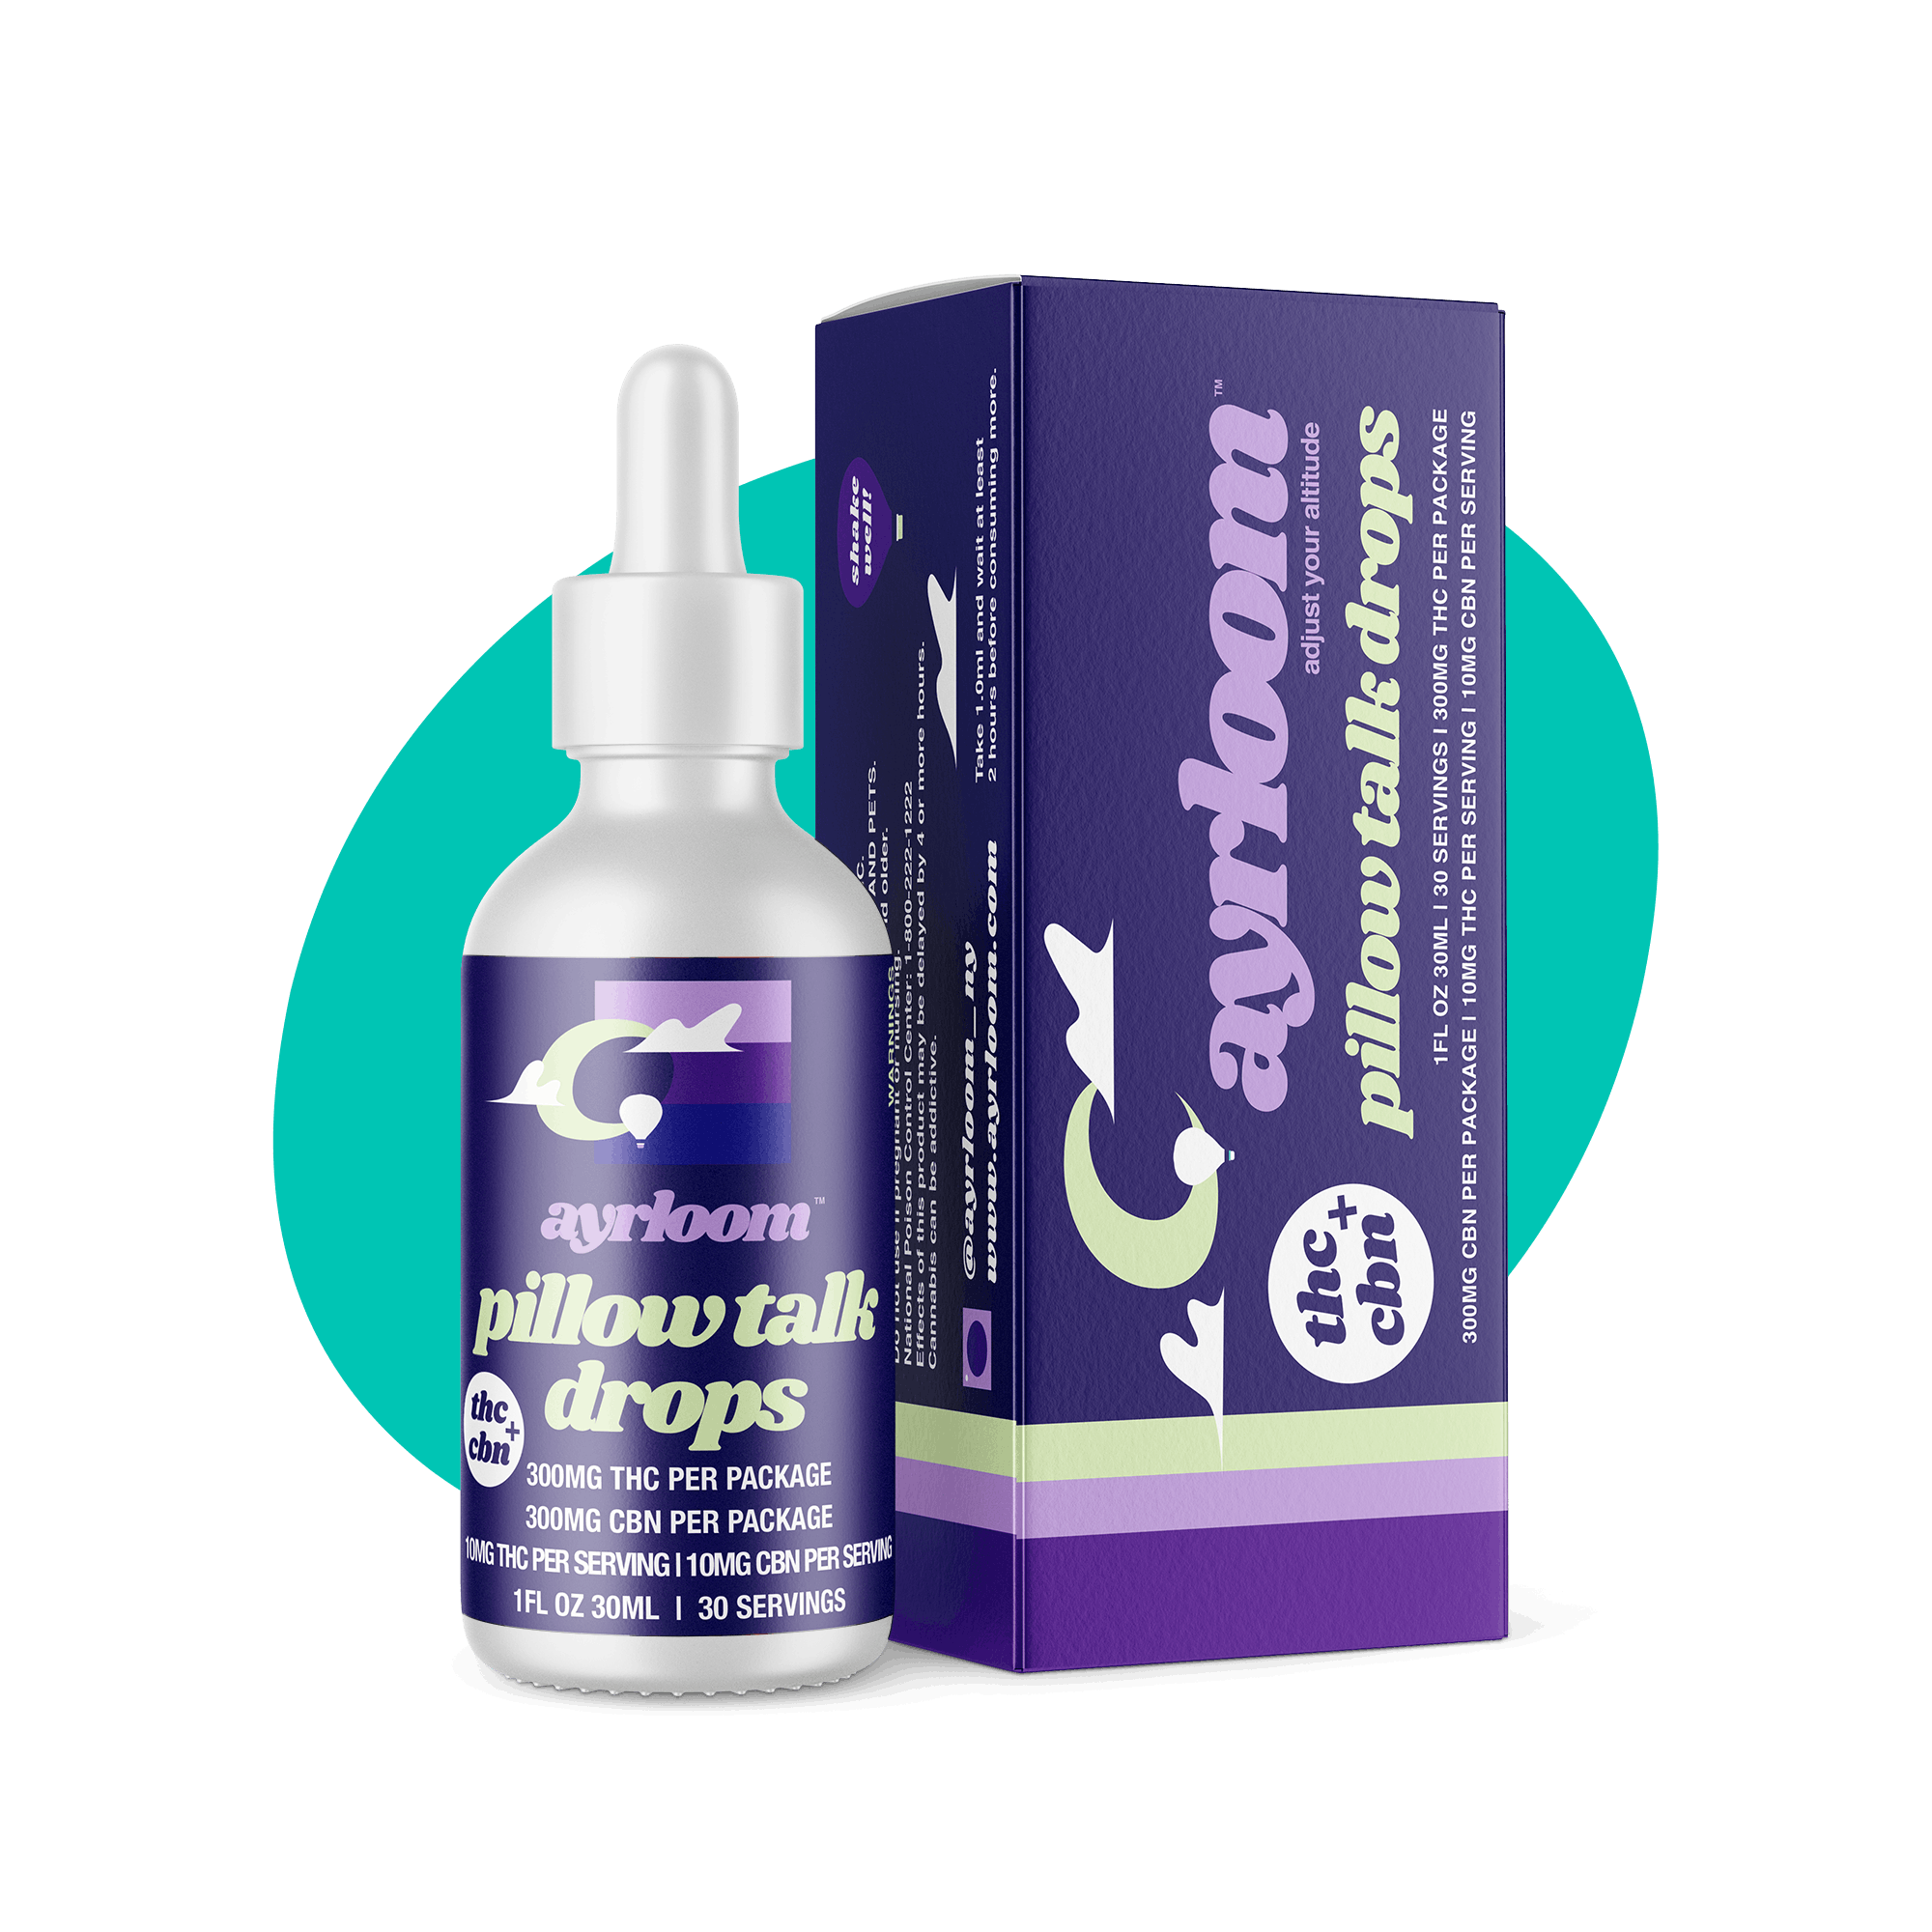 Pillow Talk Tincture • 300mg - ayrloom | Treehouse Cannabis - Weed delivery for New York